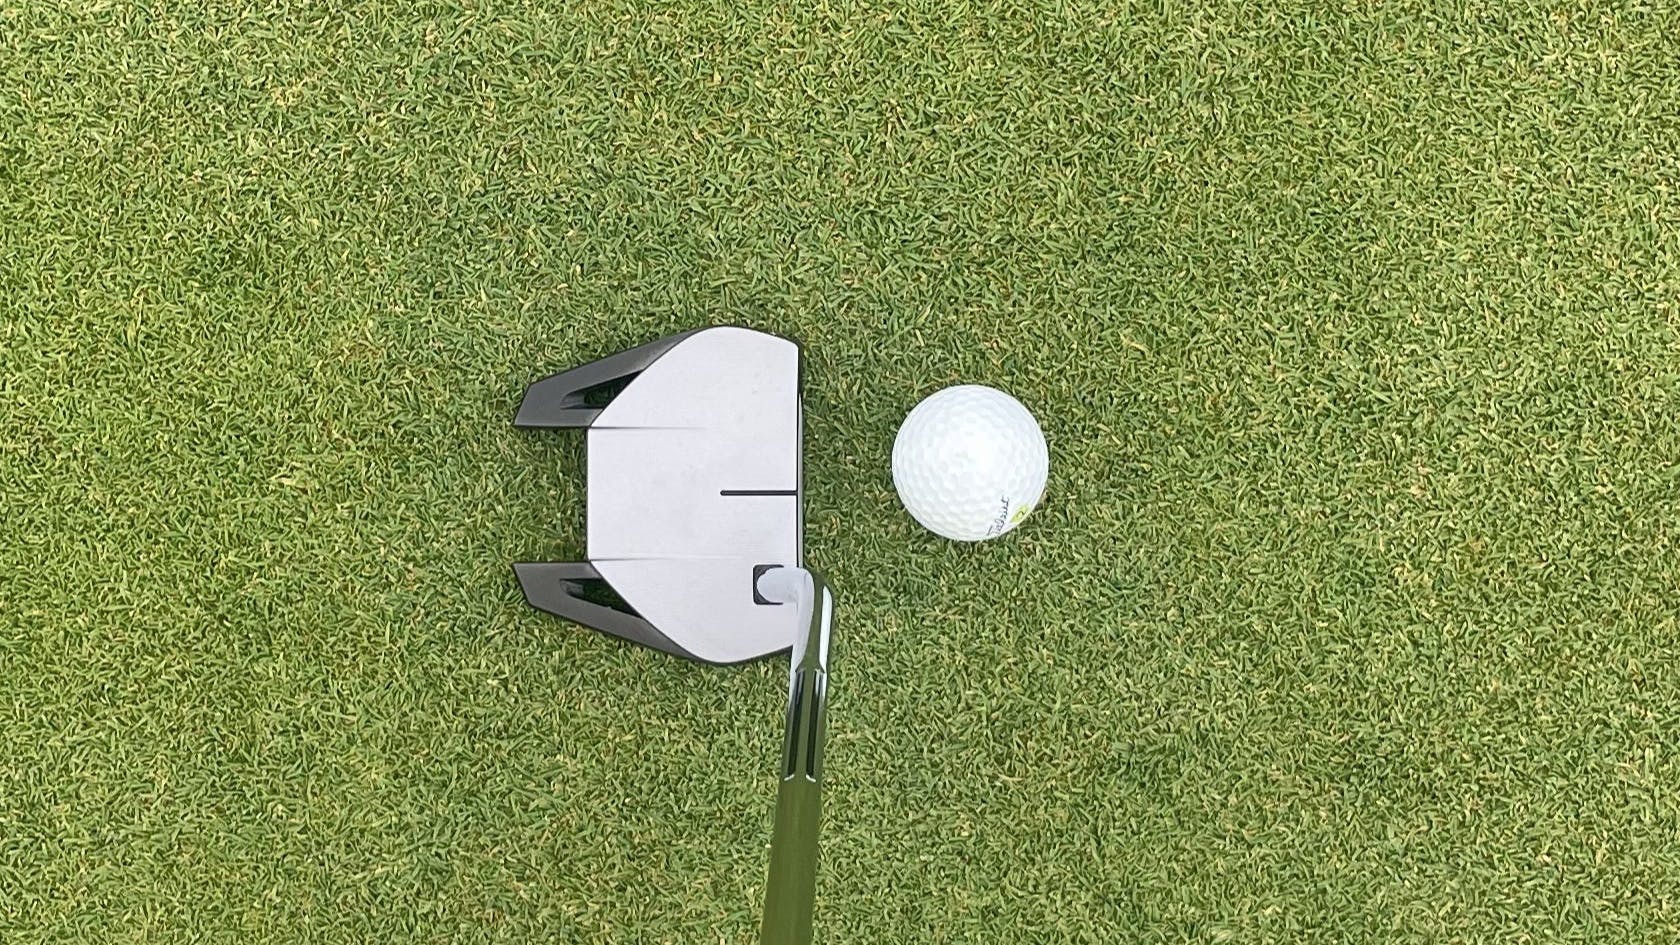 The TaylorMade Spider GT Silver Single Bend Putter in front of a golf ball.